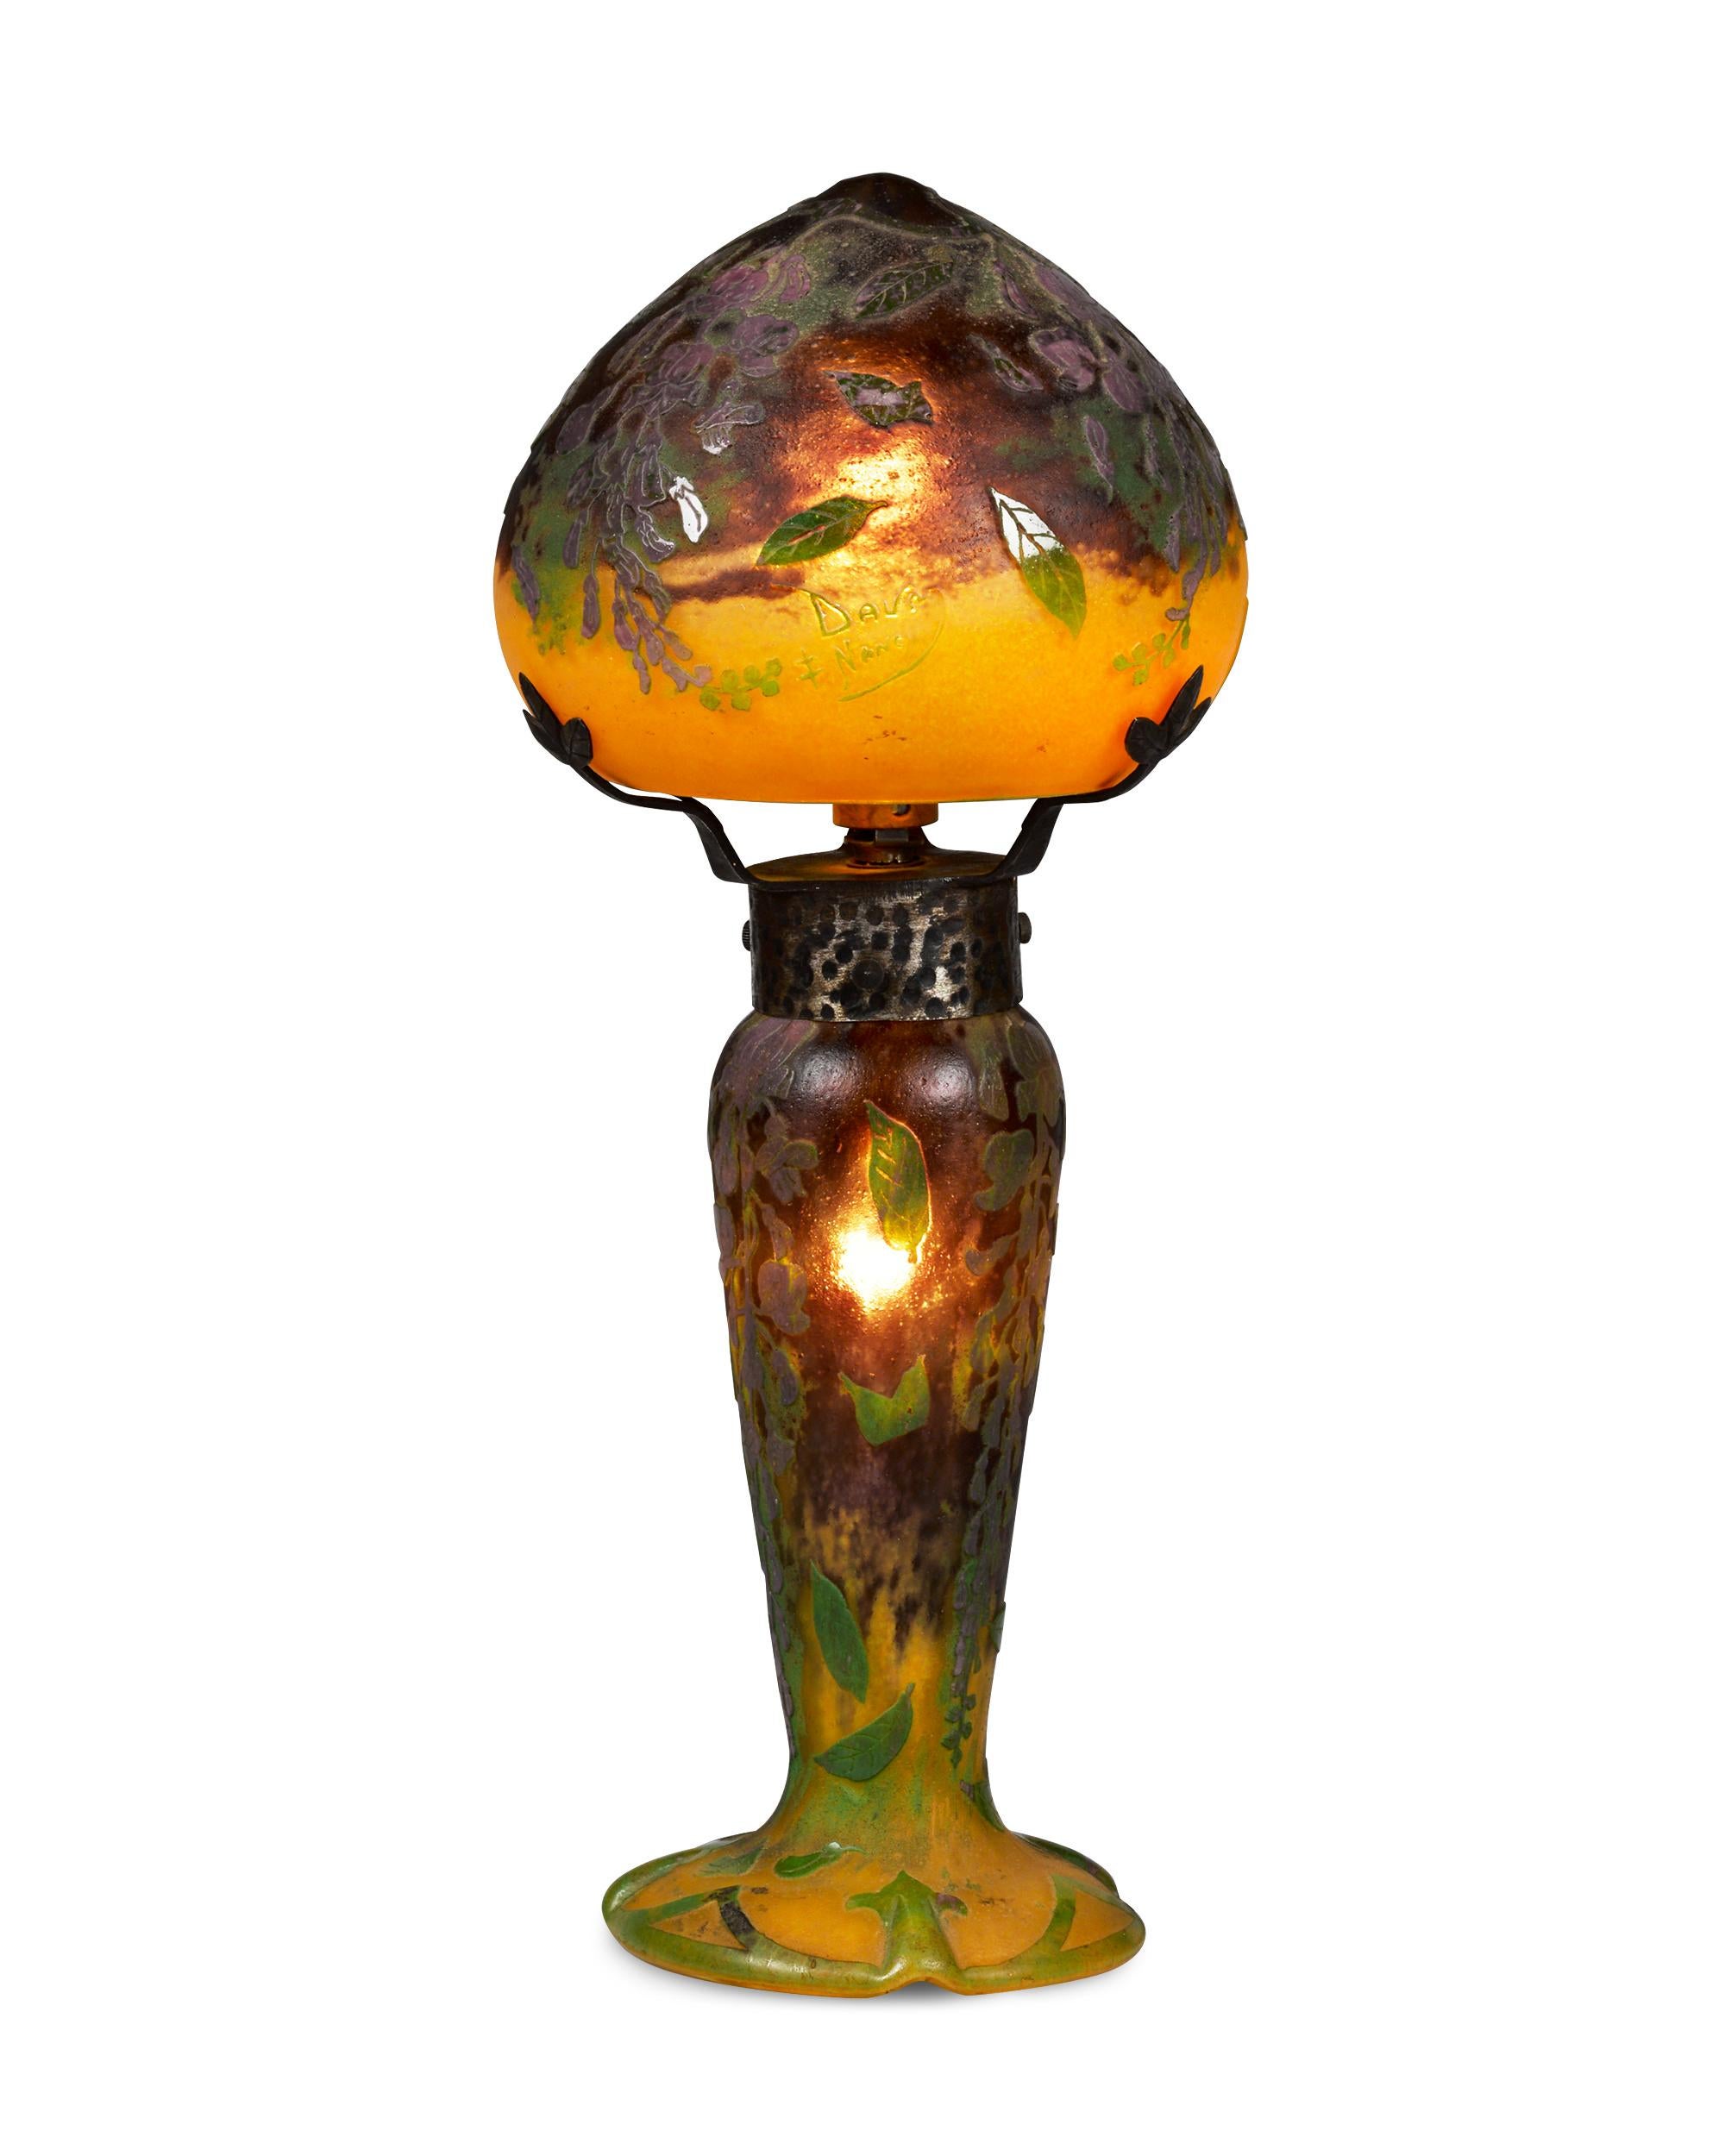 Elegant blooms grace this exceptional ovoid shape cameo glass lamp by the celebrated French glassmaking firm, Daum Nancy. Careful wheel-carving and acid-etching reveal layers of vibrant color in this magnificent celebration of Art Nouveau